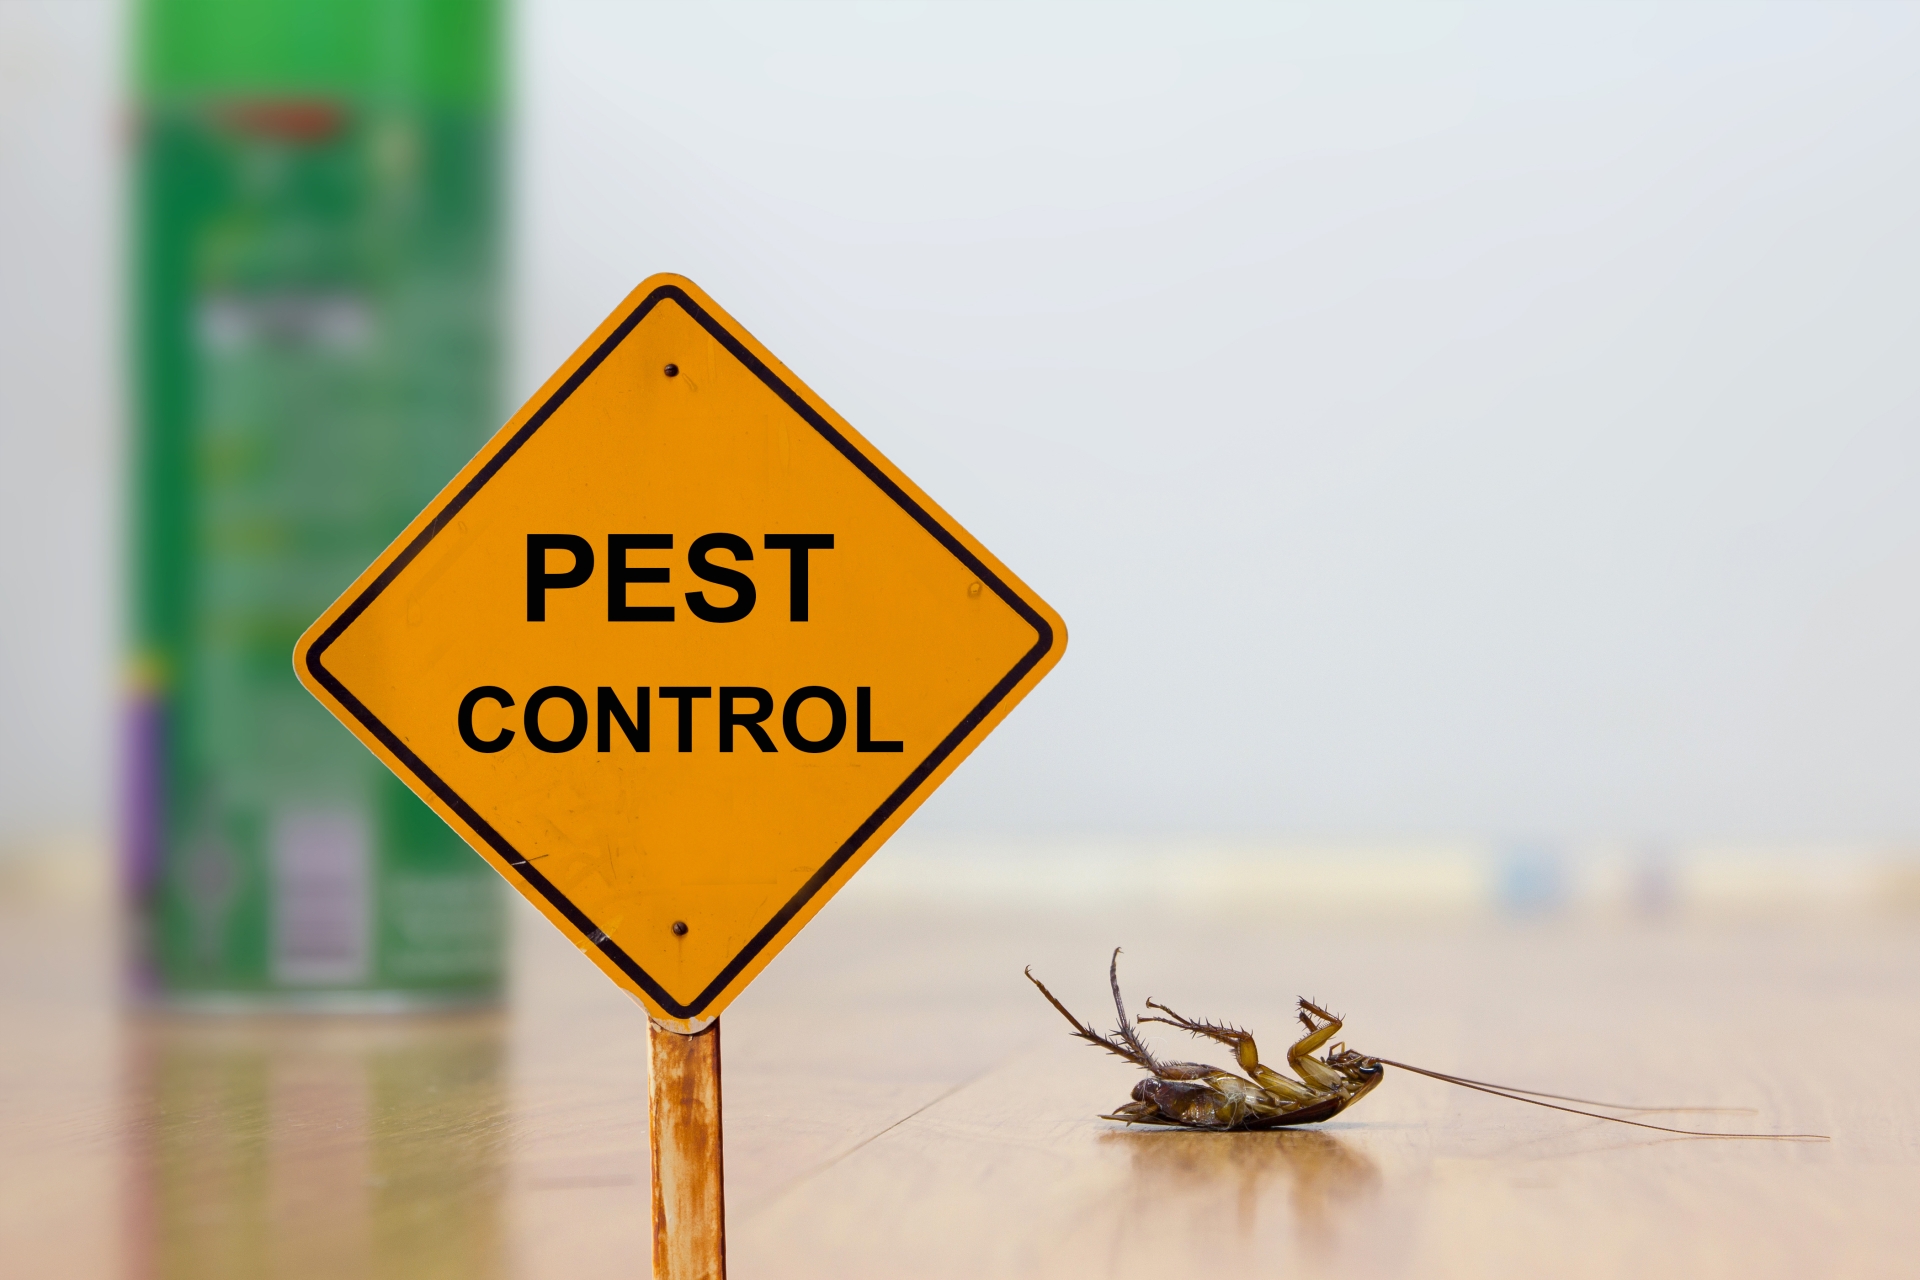 24 Hour Pest Control, Pest Control in East Finchley, N2. Call Now 020 8166 9746